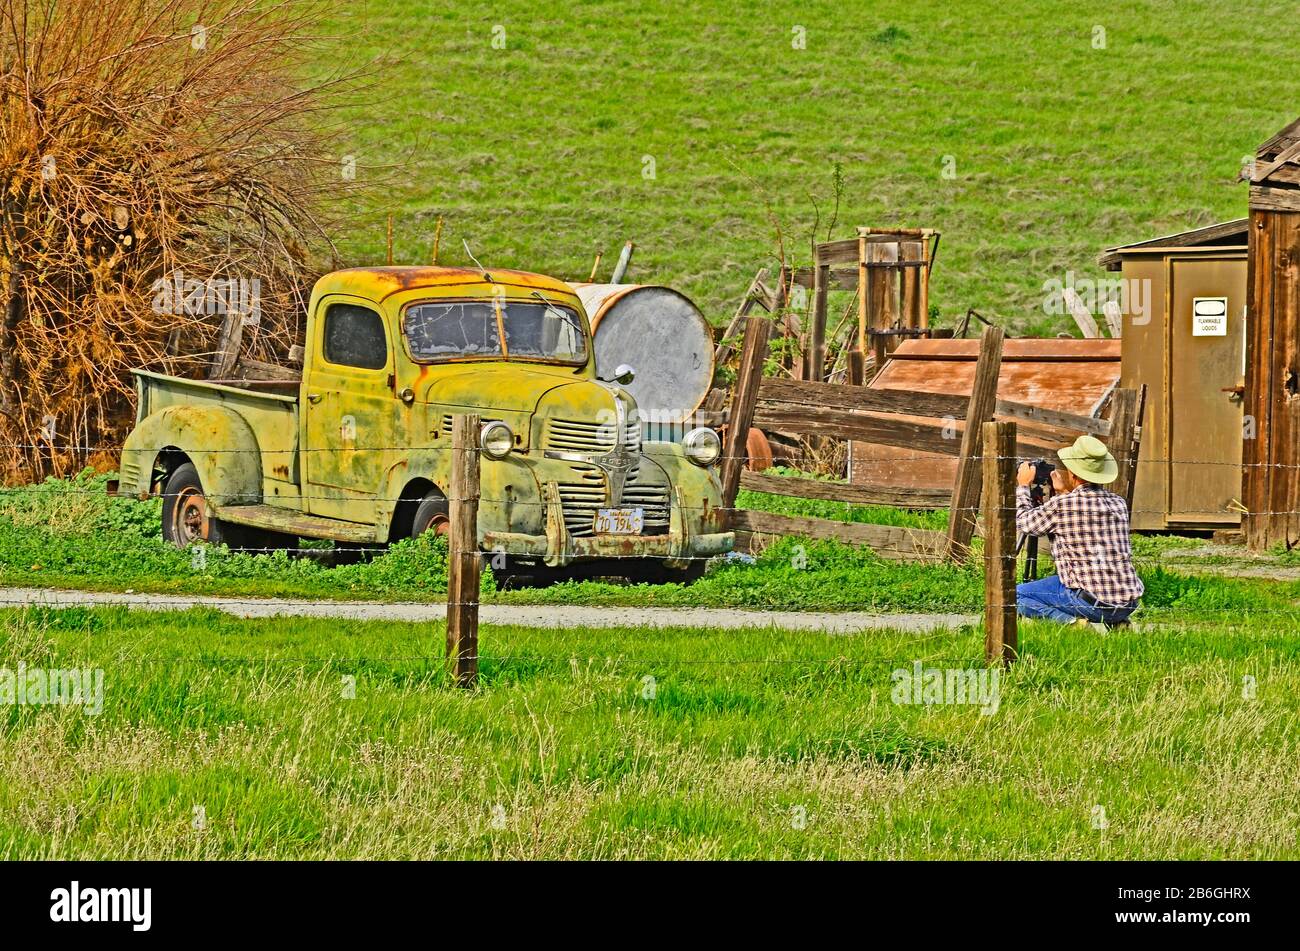 Photographer wearing plaid shirt, hat and jeans sets up to photograph rusty green pickup truck, Black Diamond Regional Park, Antioch, California, USA Stock Photo